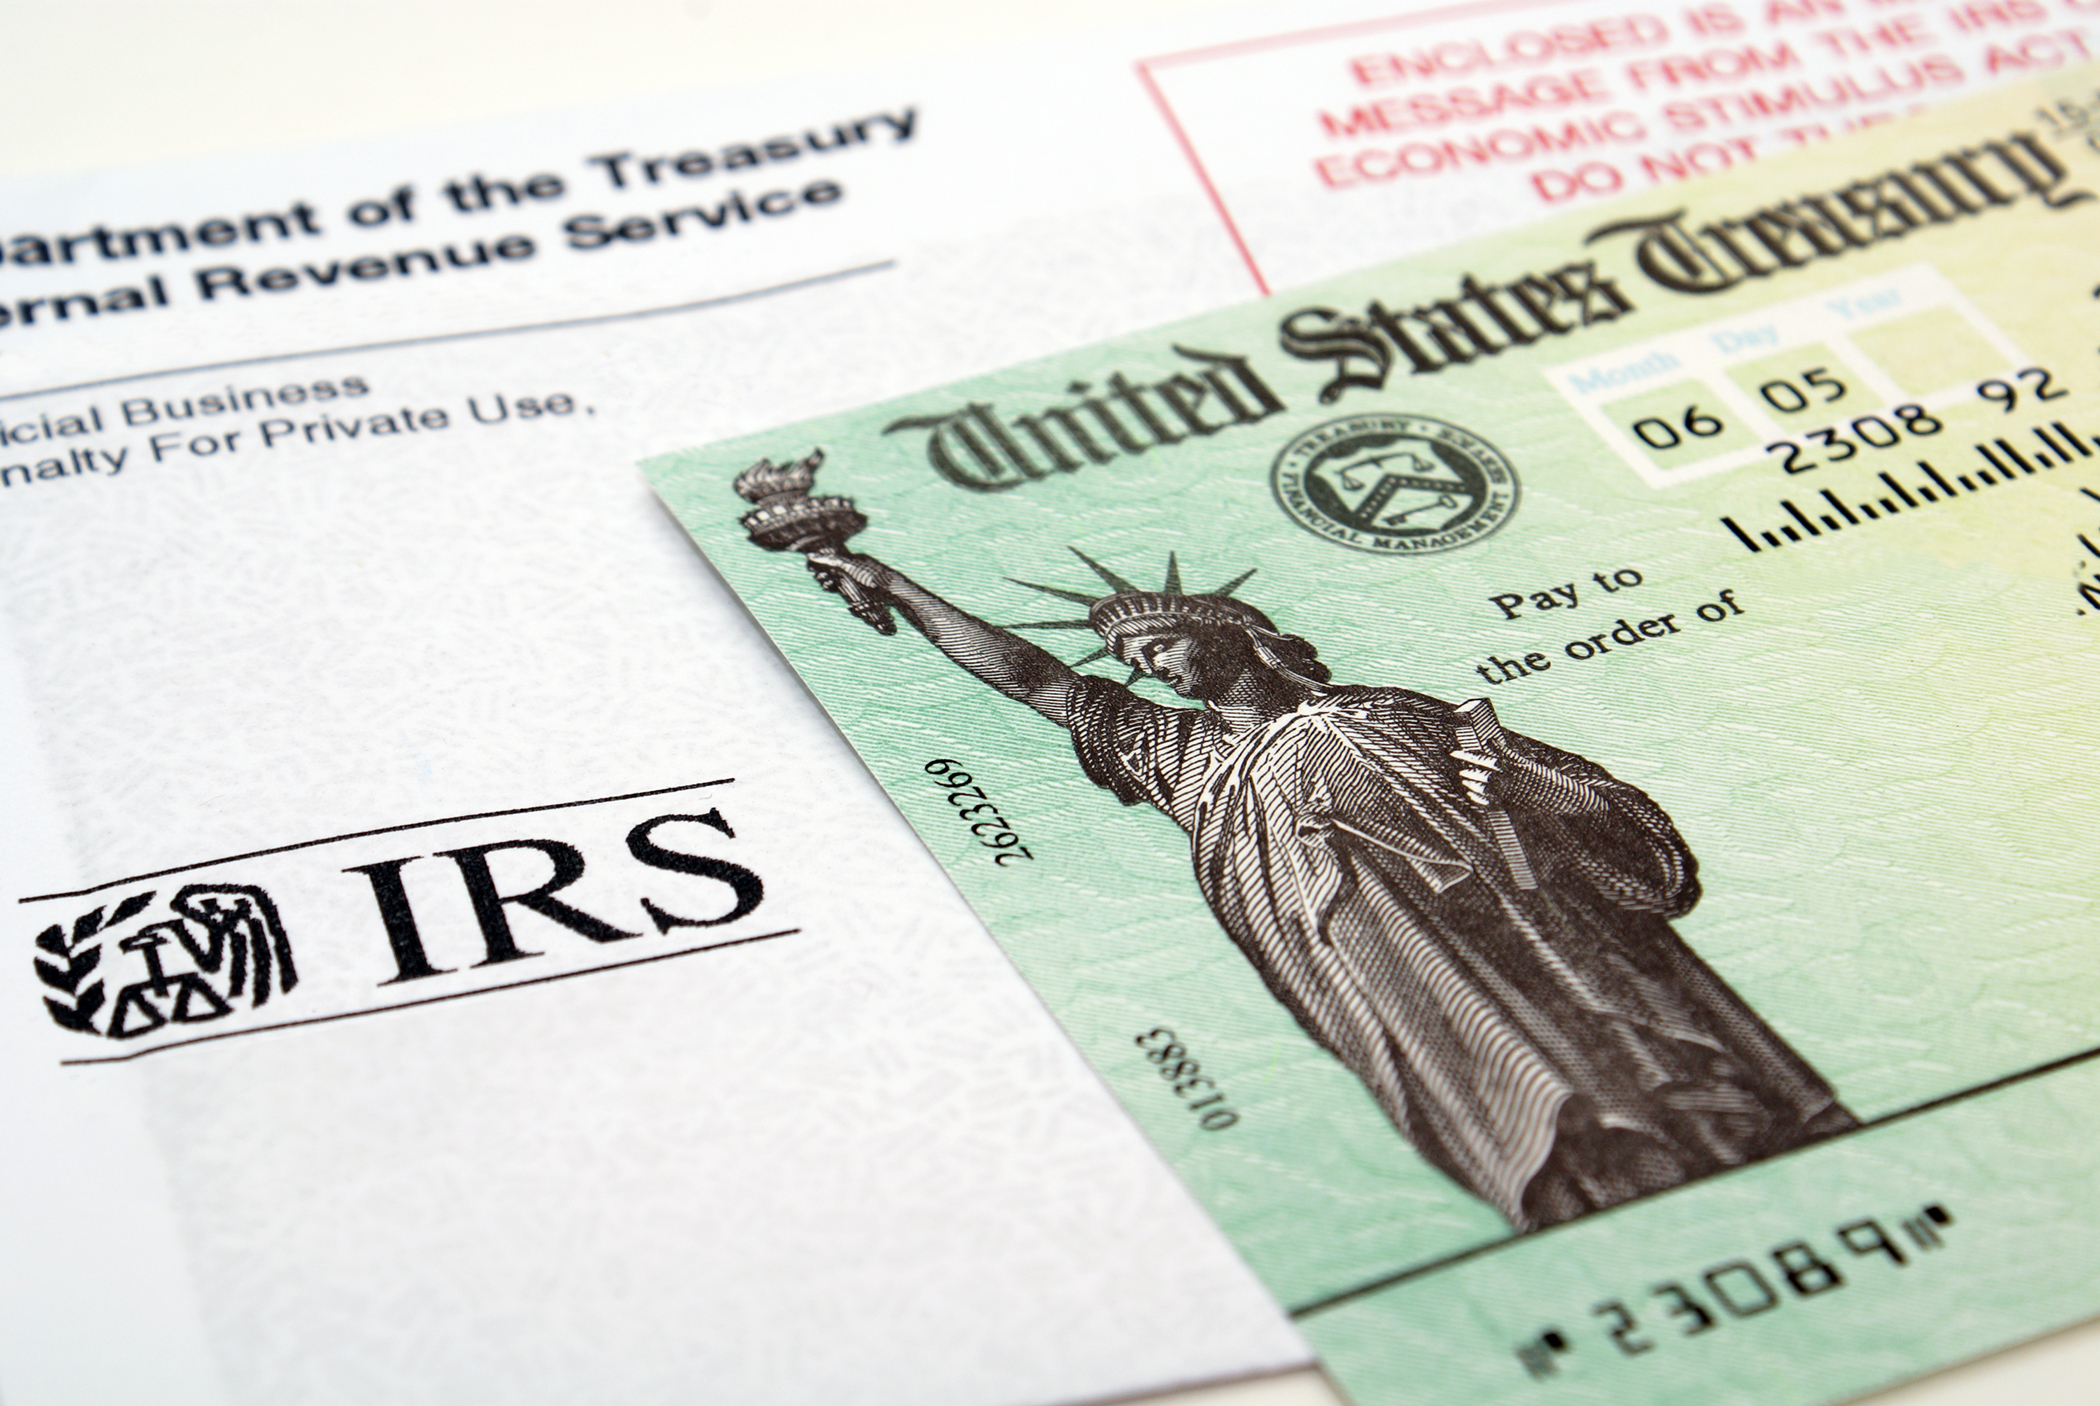 Stimulus Checks and Tax Refunds: How to Claim Missing Money | Money